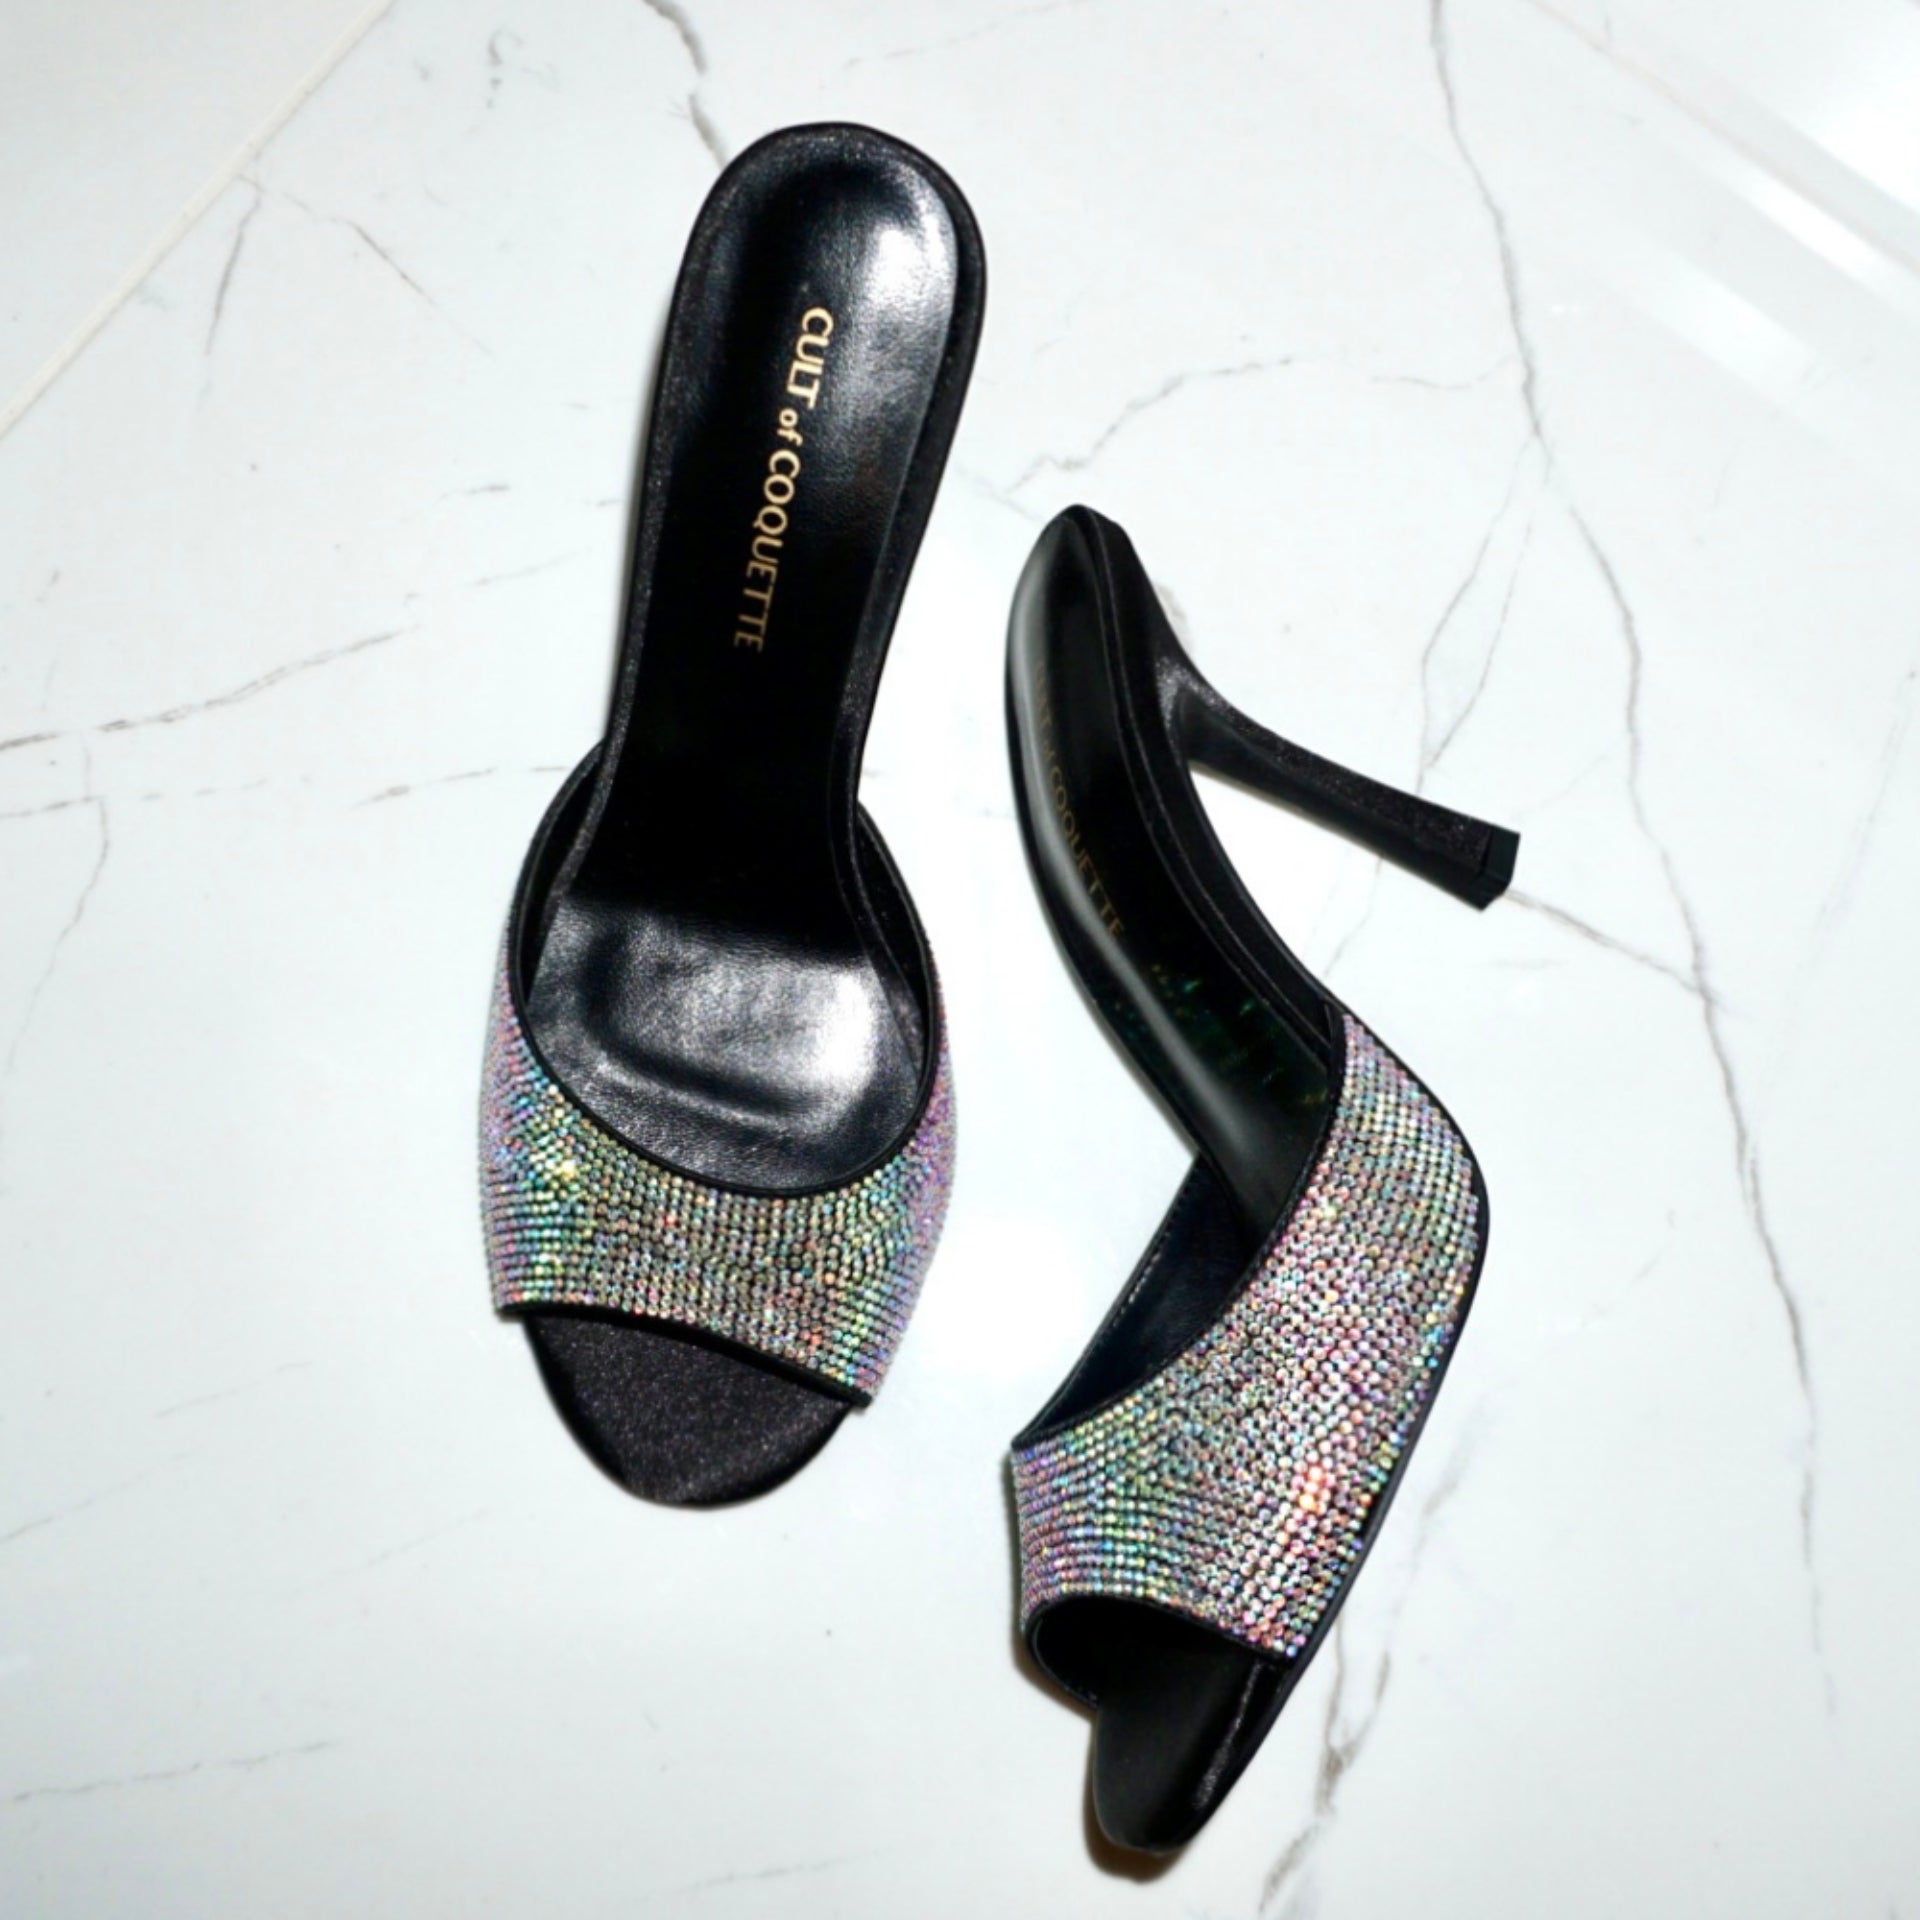 New Year's Eve Going Out Shoes You Can Dance The Night Away In